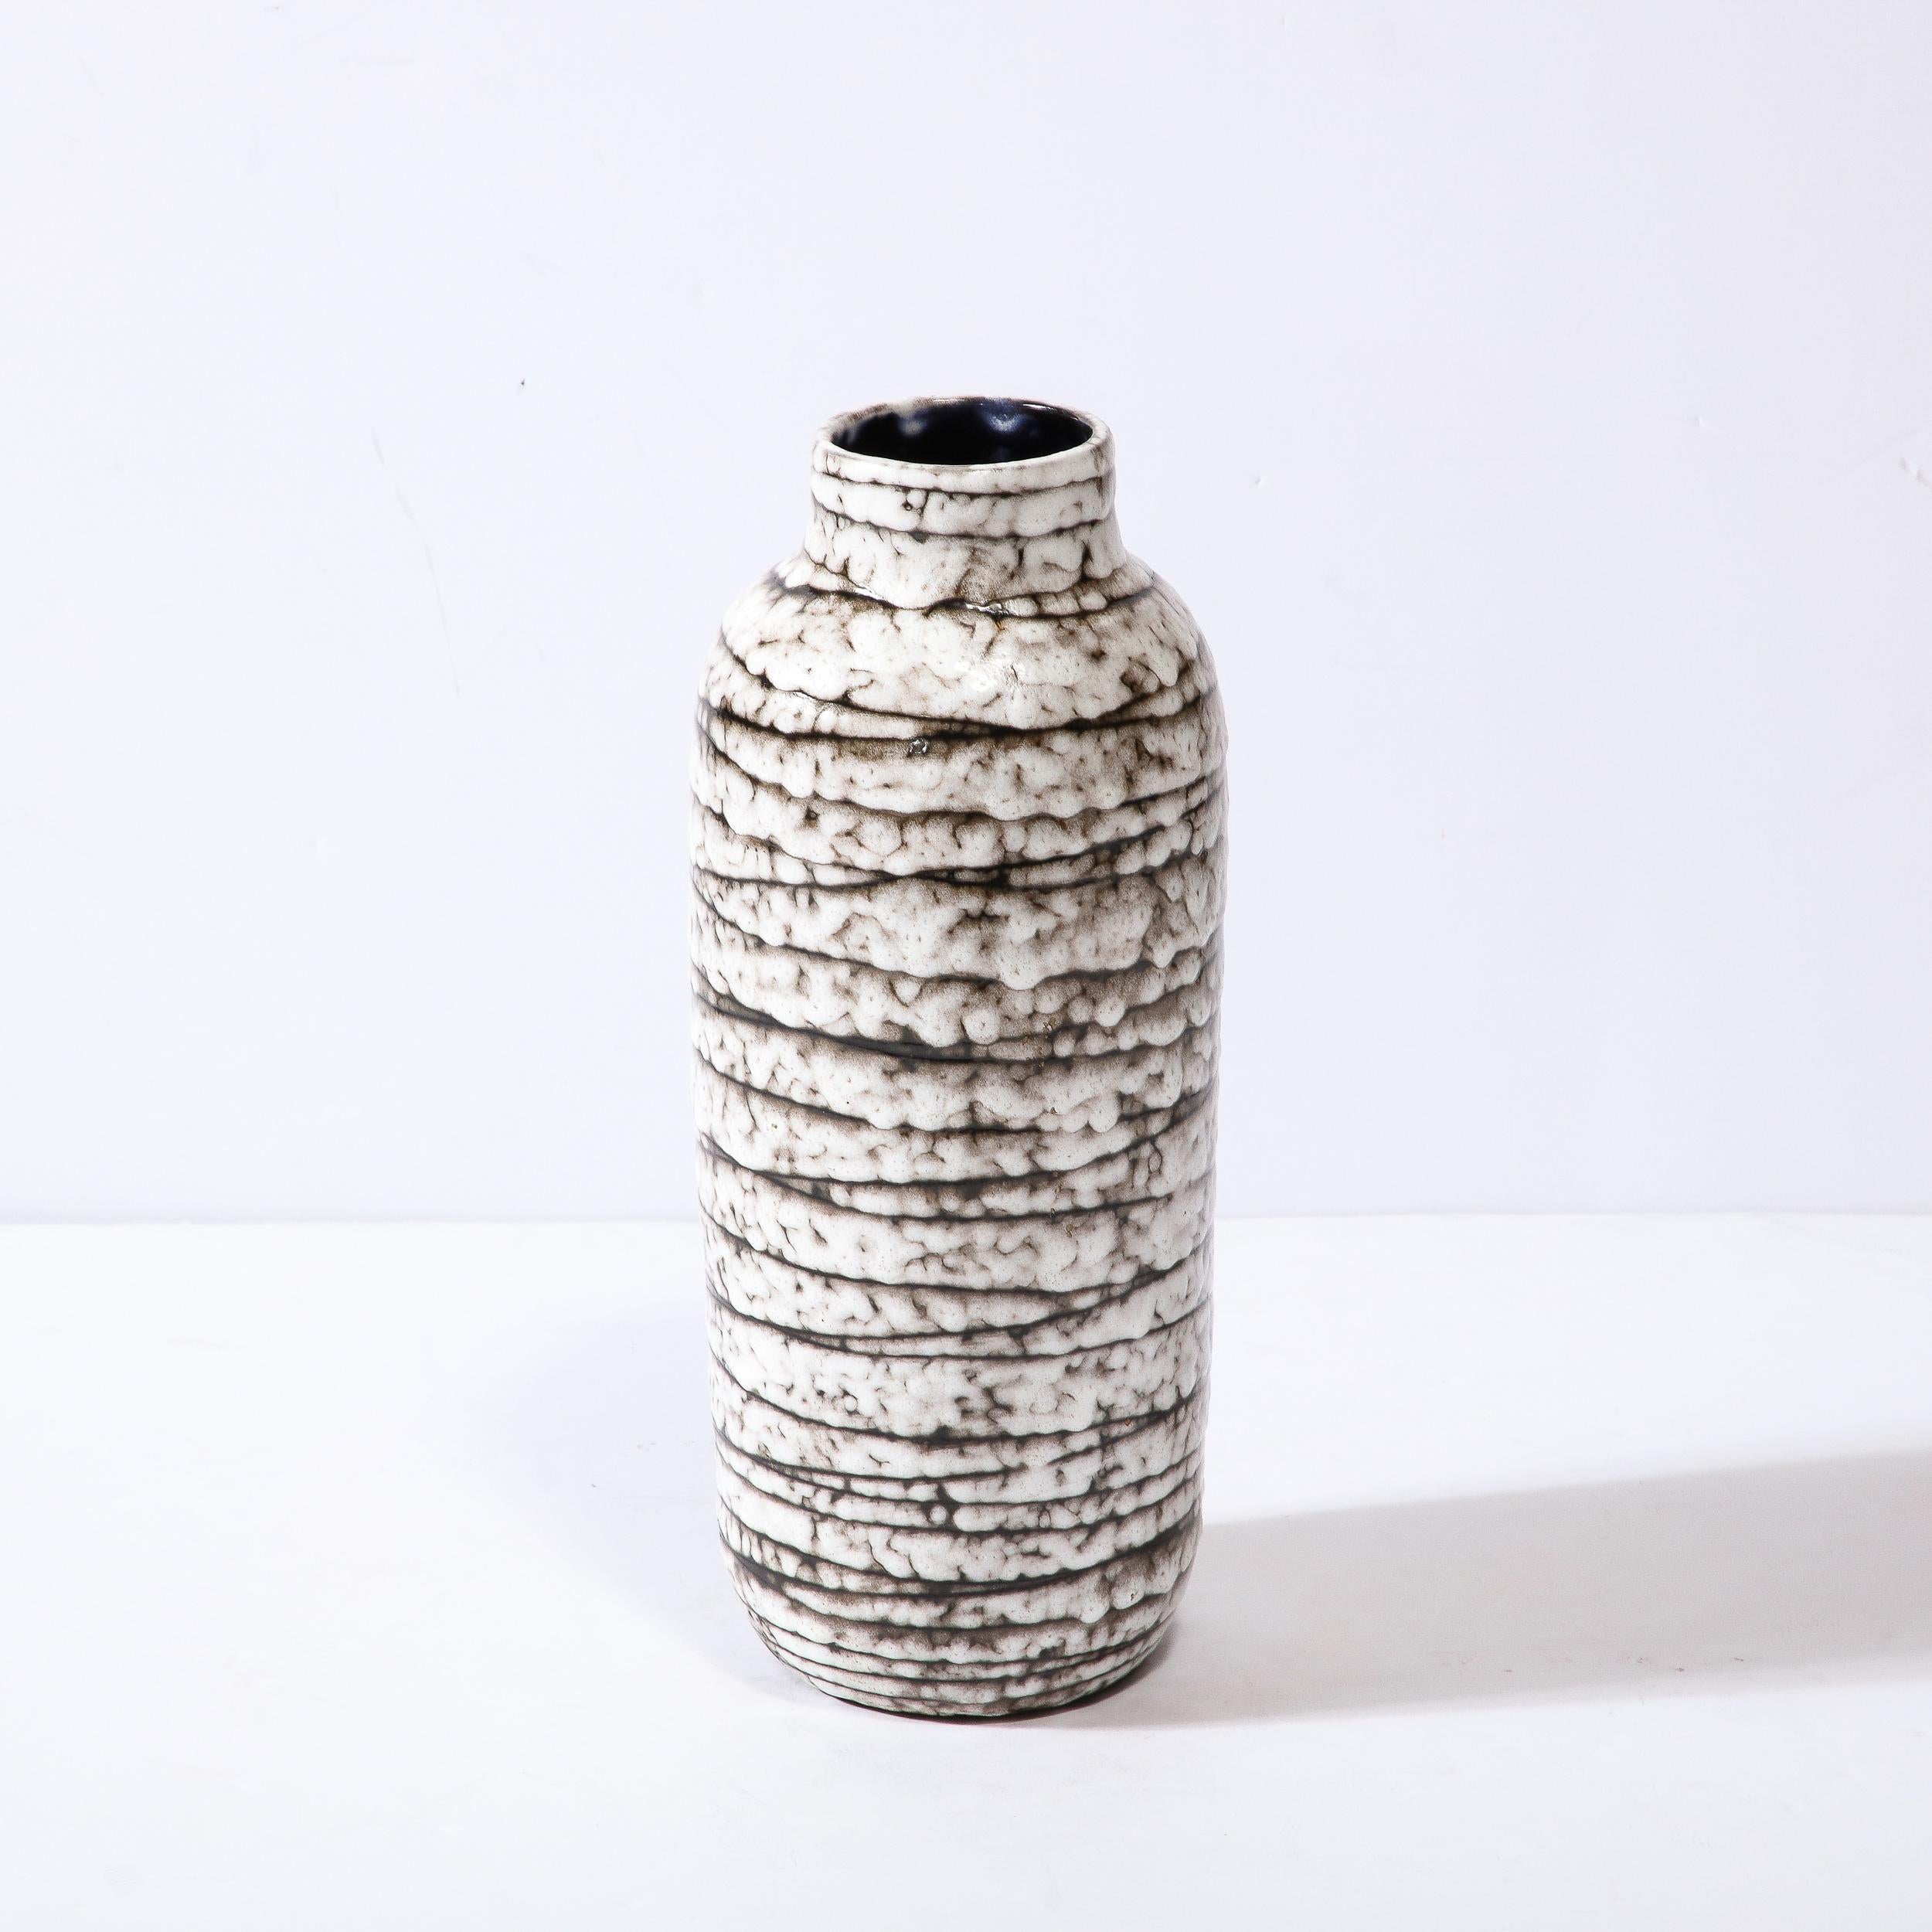 This Mid-Century Modernist Ceramic Vase is a beautiful example of Post War European Ceramics, realized in Hódmezovasarhely Majolikagyár, Hungary circa 1960. With a Stunning textural finish composed in Cream White and Blackened Umber, the surface of